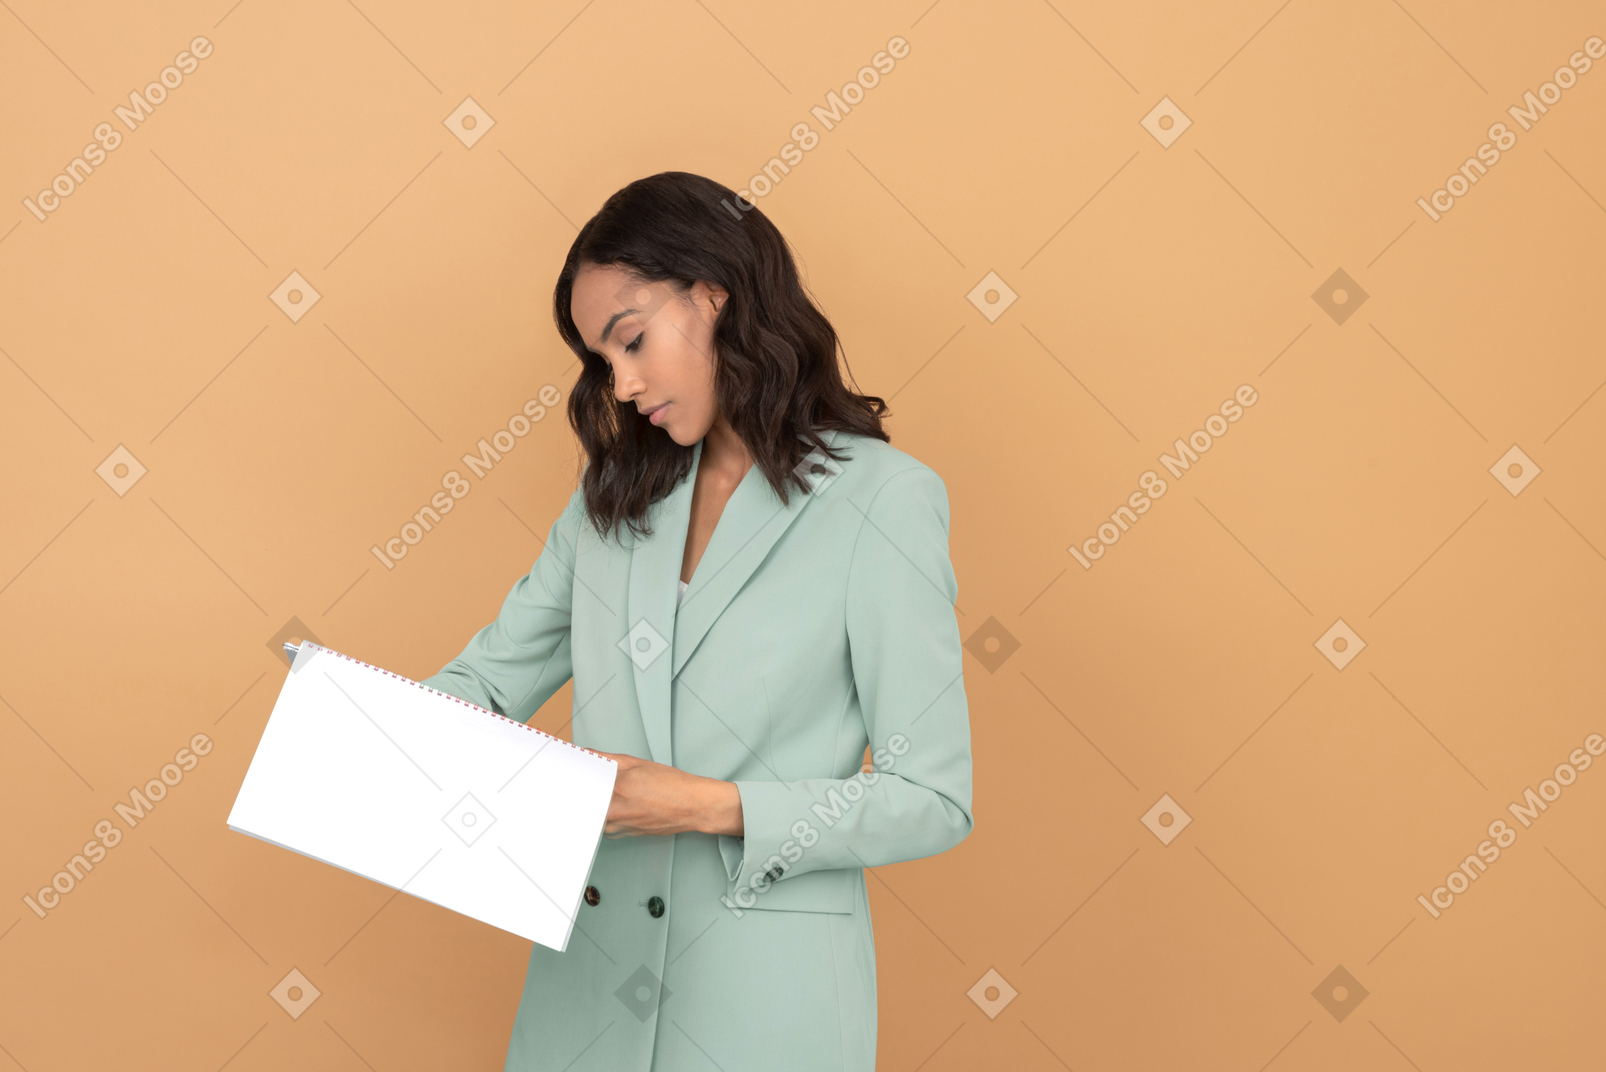 Attractive young woman reading a file